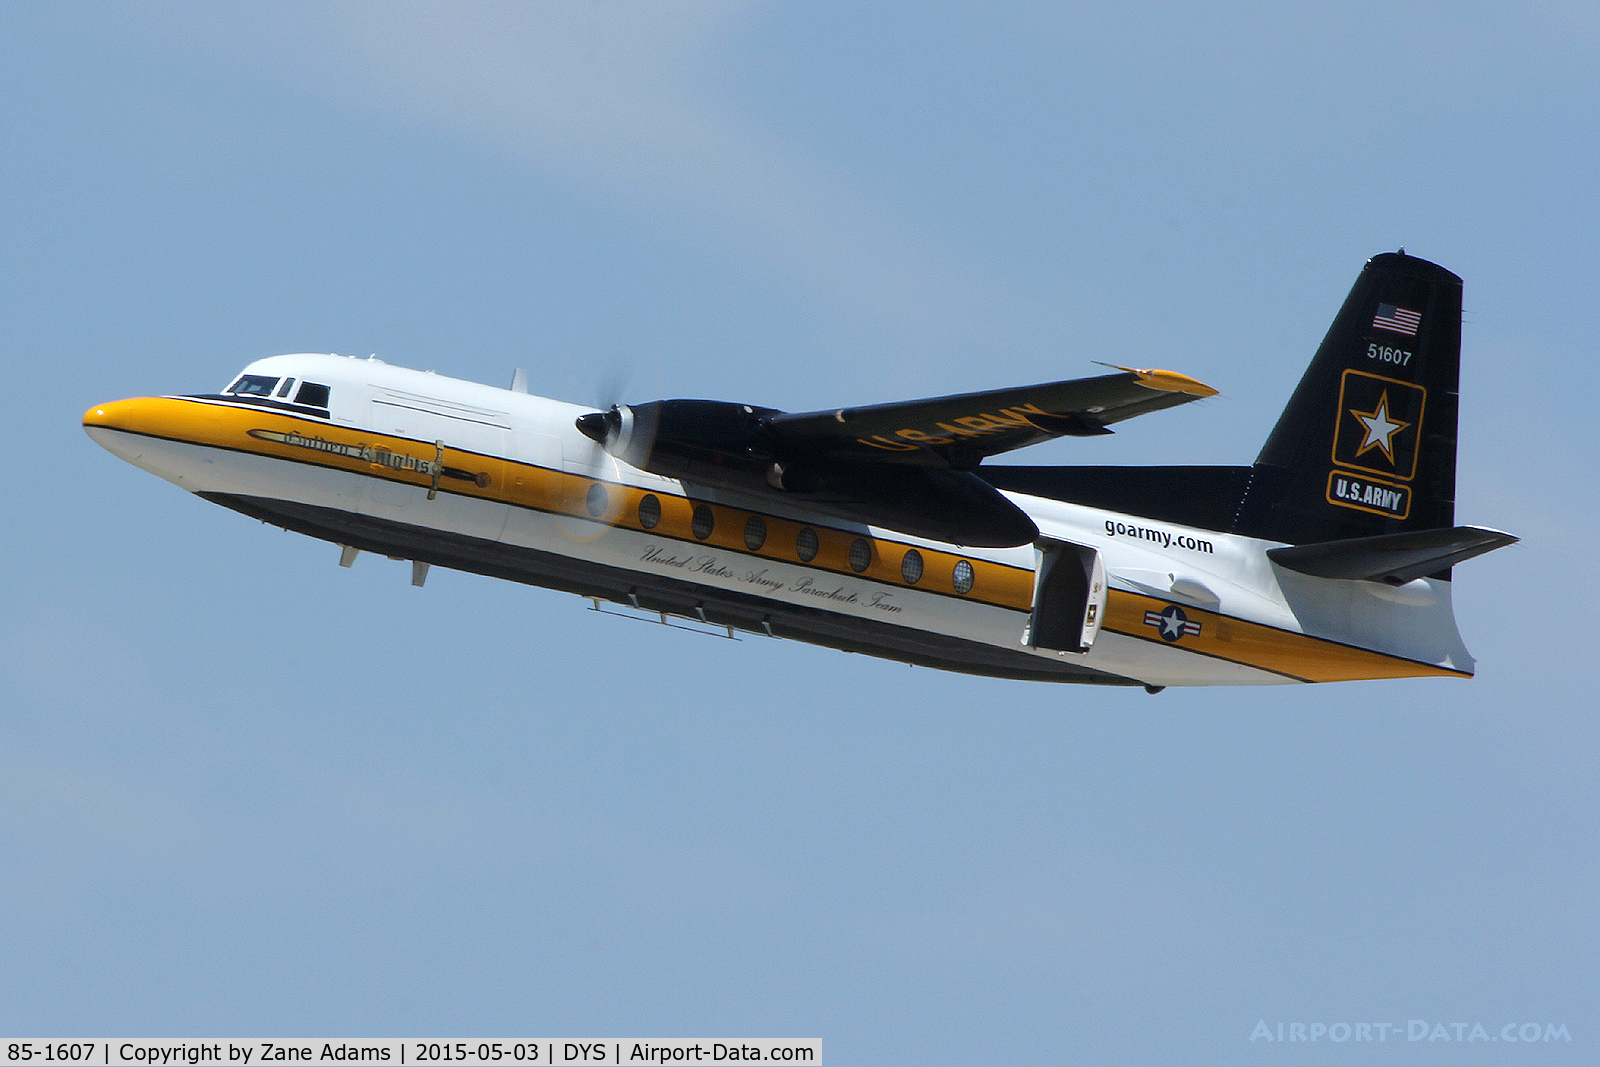 85-1607, 1983 Fokker C-31A (F27-400M) Troopship C/N 10653, At the 2014 Big Country Airshow - Dyess AFB, TX